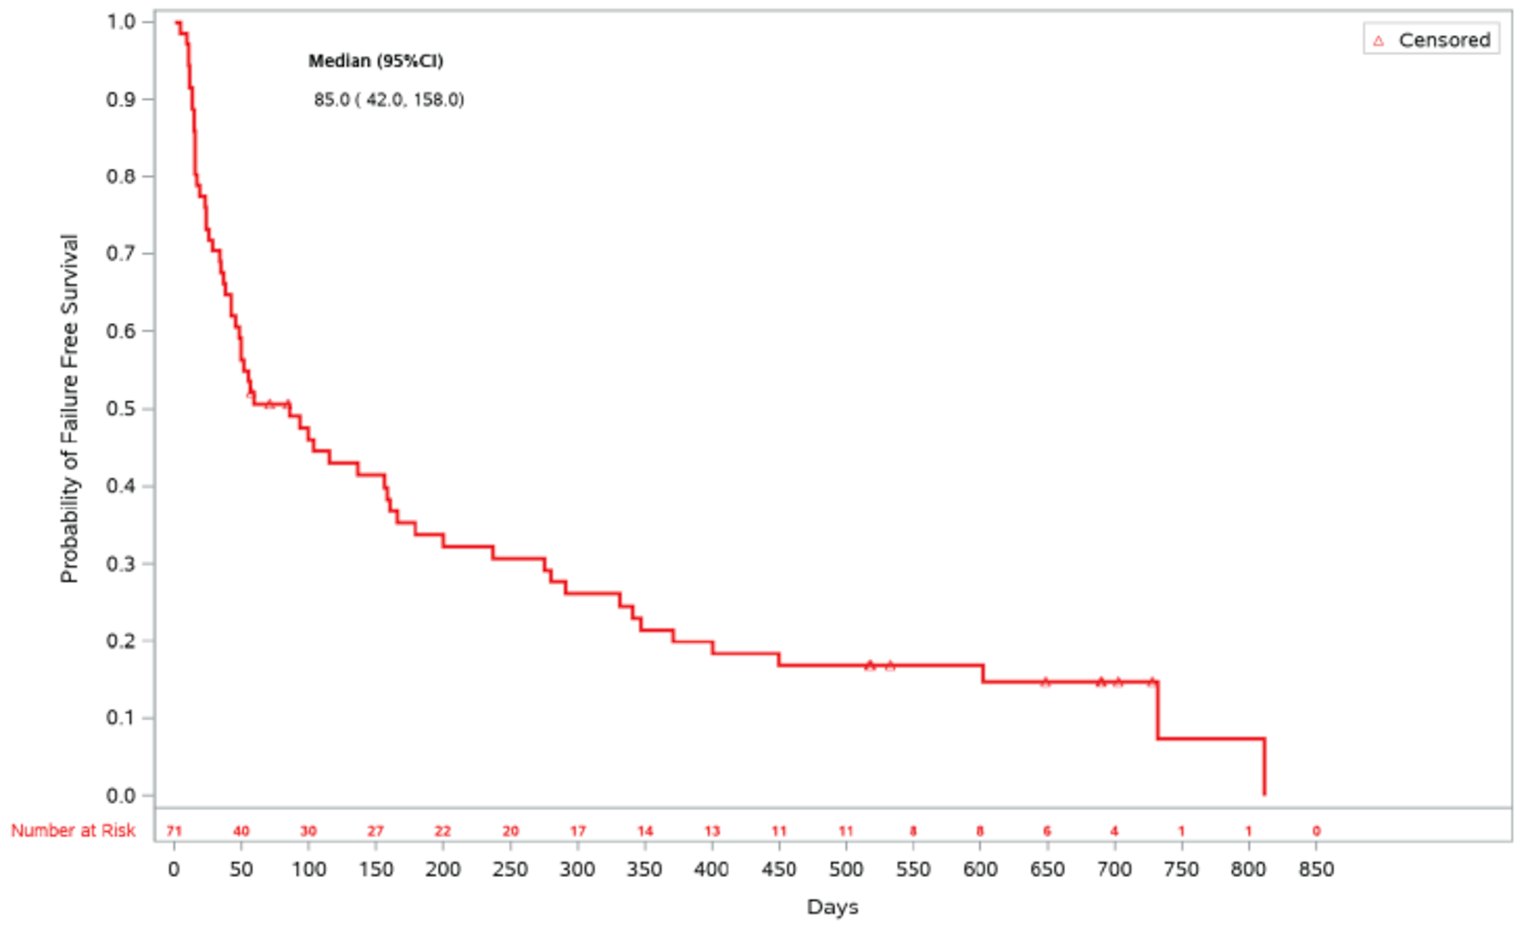 KM curve for FFS is shown for patients who received ruxolitinib. The curve decreases over time. The slope is steeper in the beginning than toward the end. The curve ends at about 810 days.